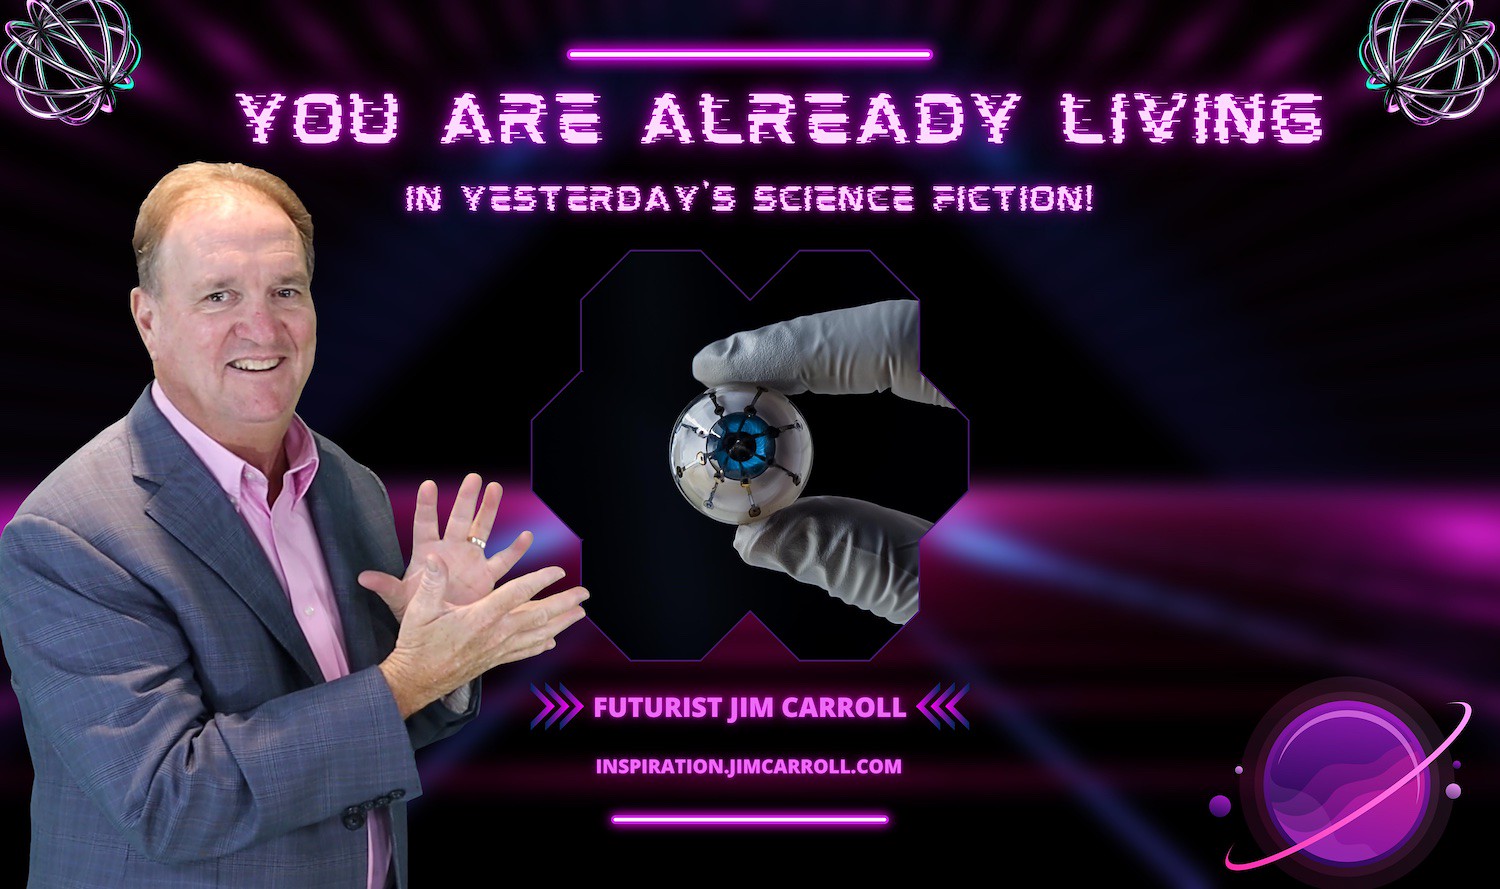 "You are already living in yesterday's science fiction!" - Futurist Jim Carroll